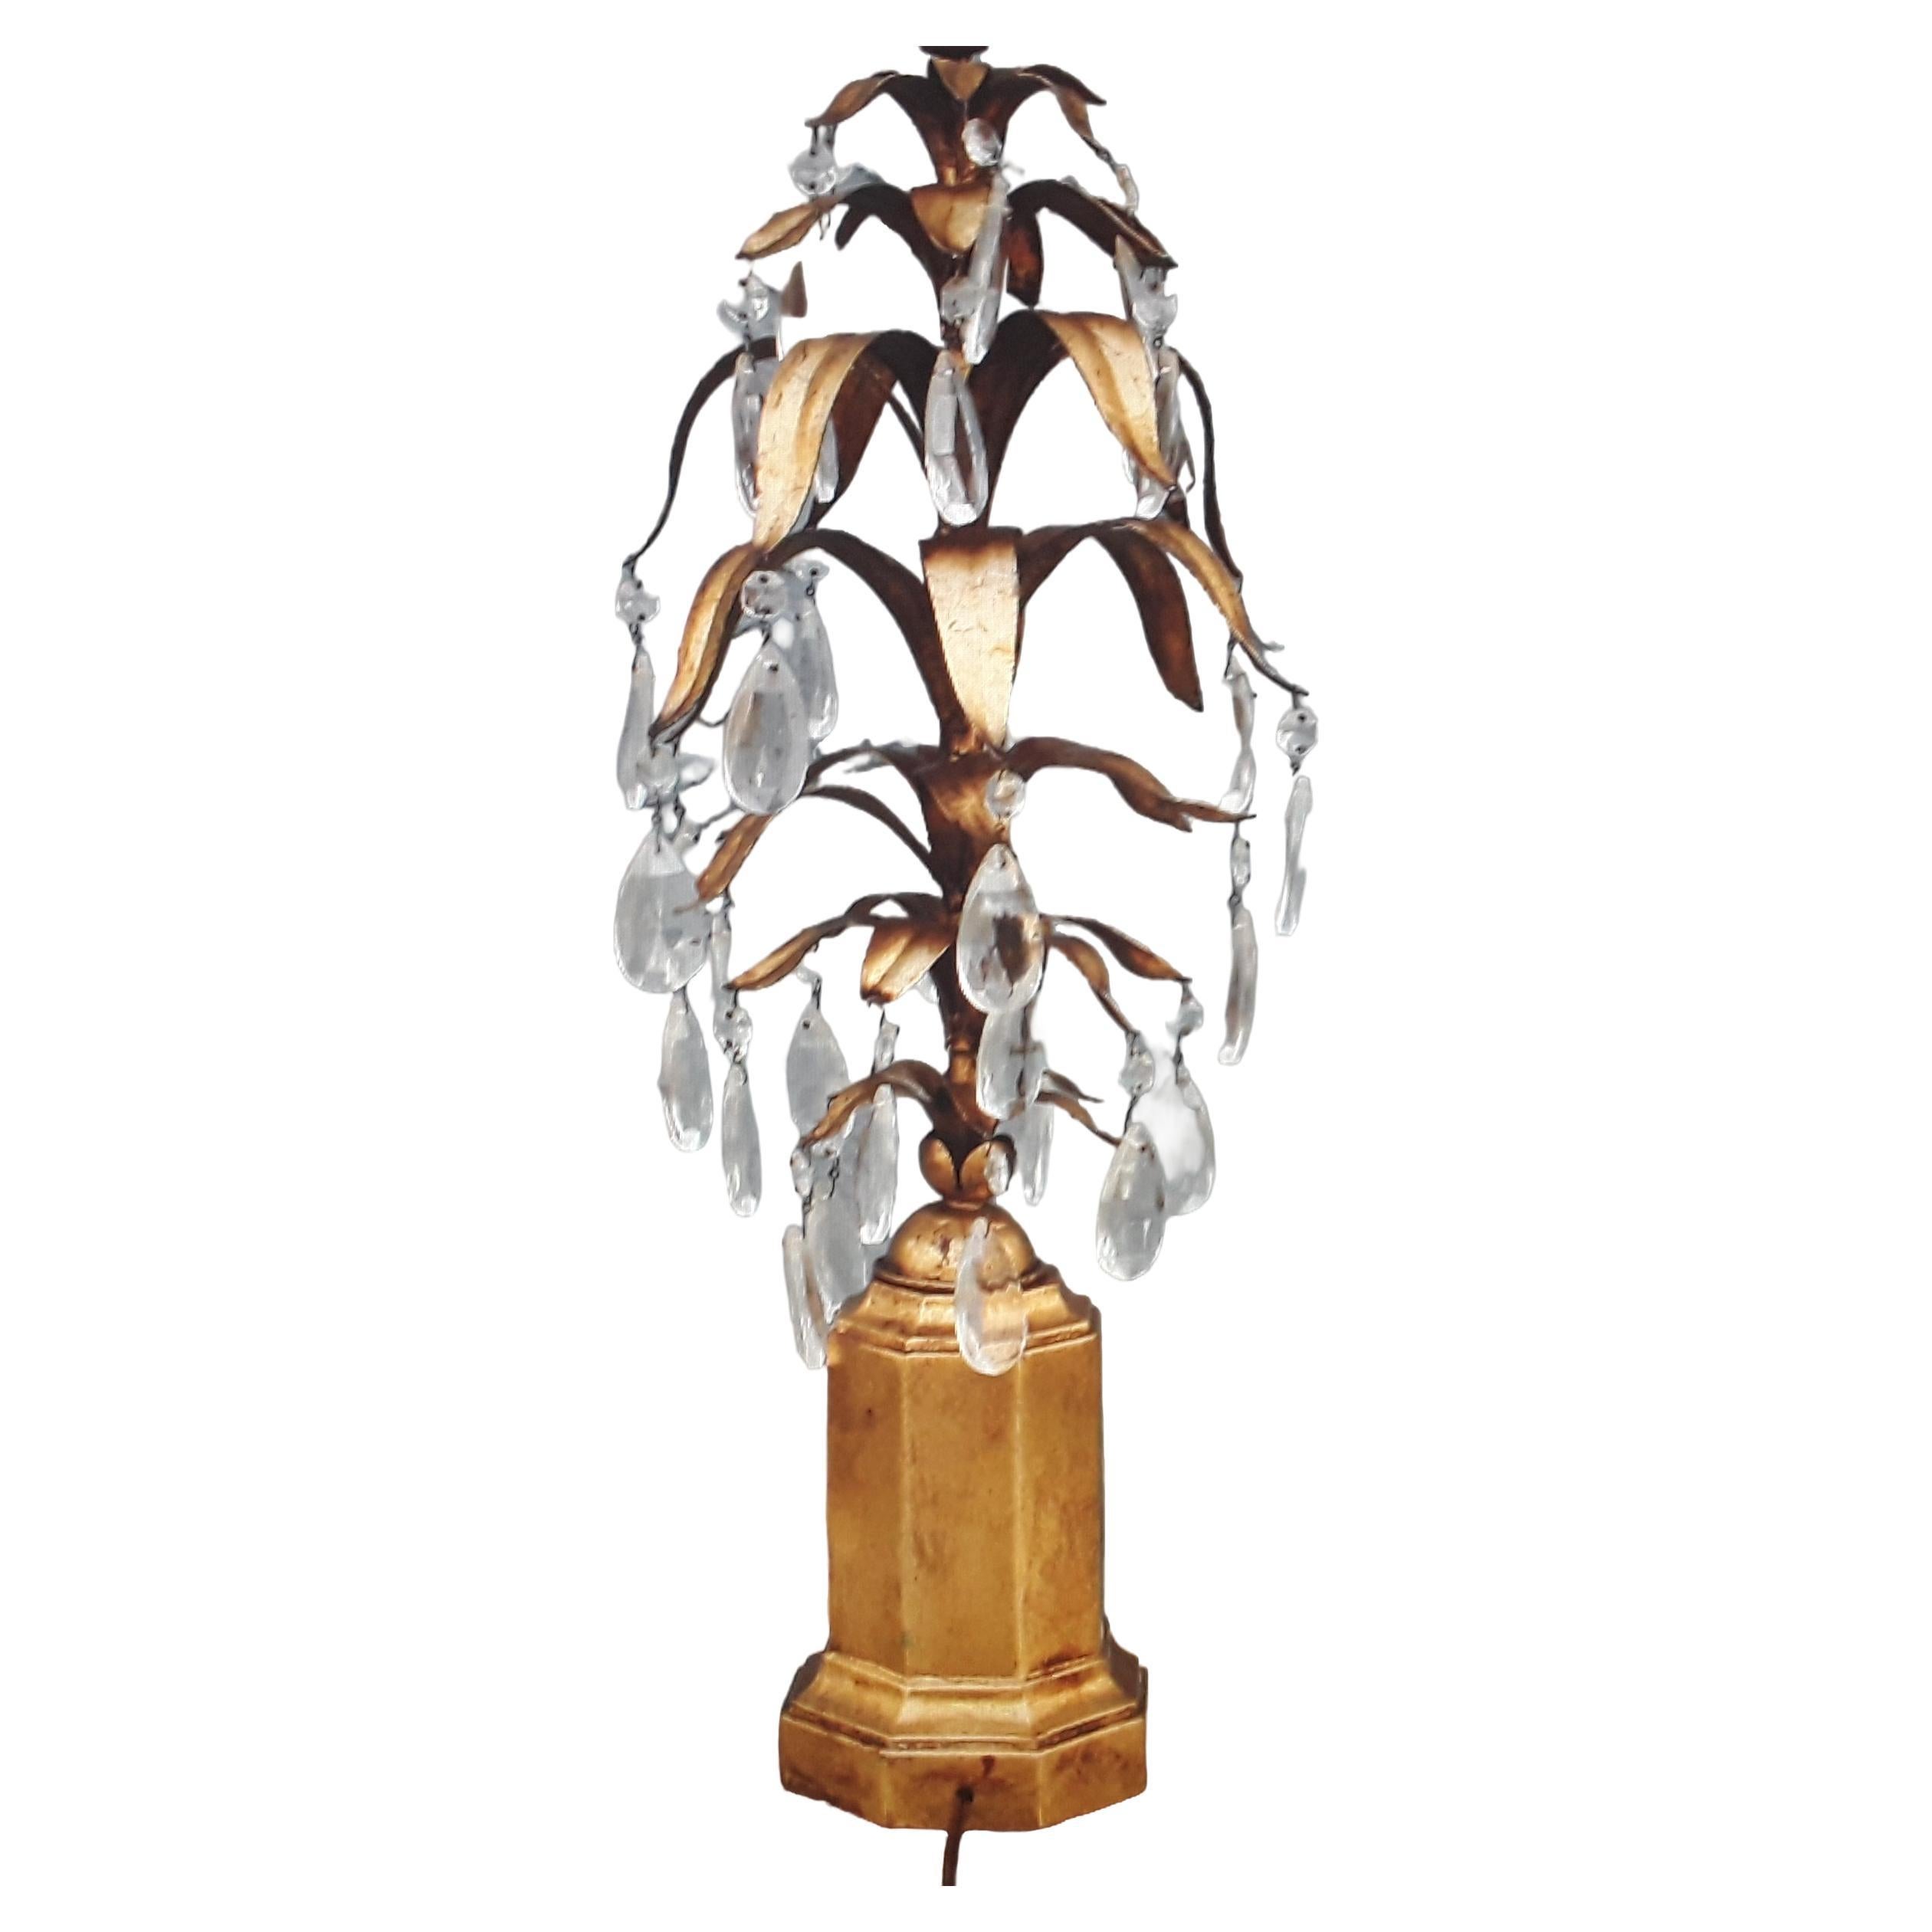 1950s Italian Hollywood Regency Giltwood Based Crystal/Tole Fern Form Table Lamp For Sale